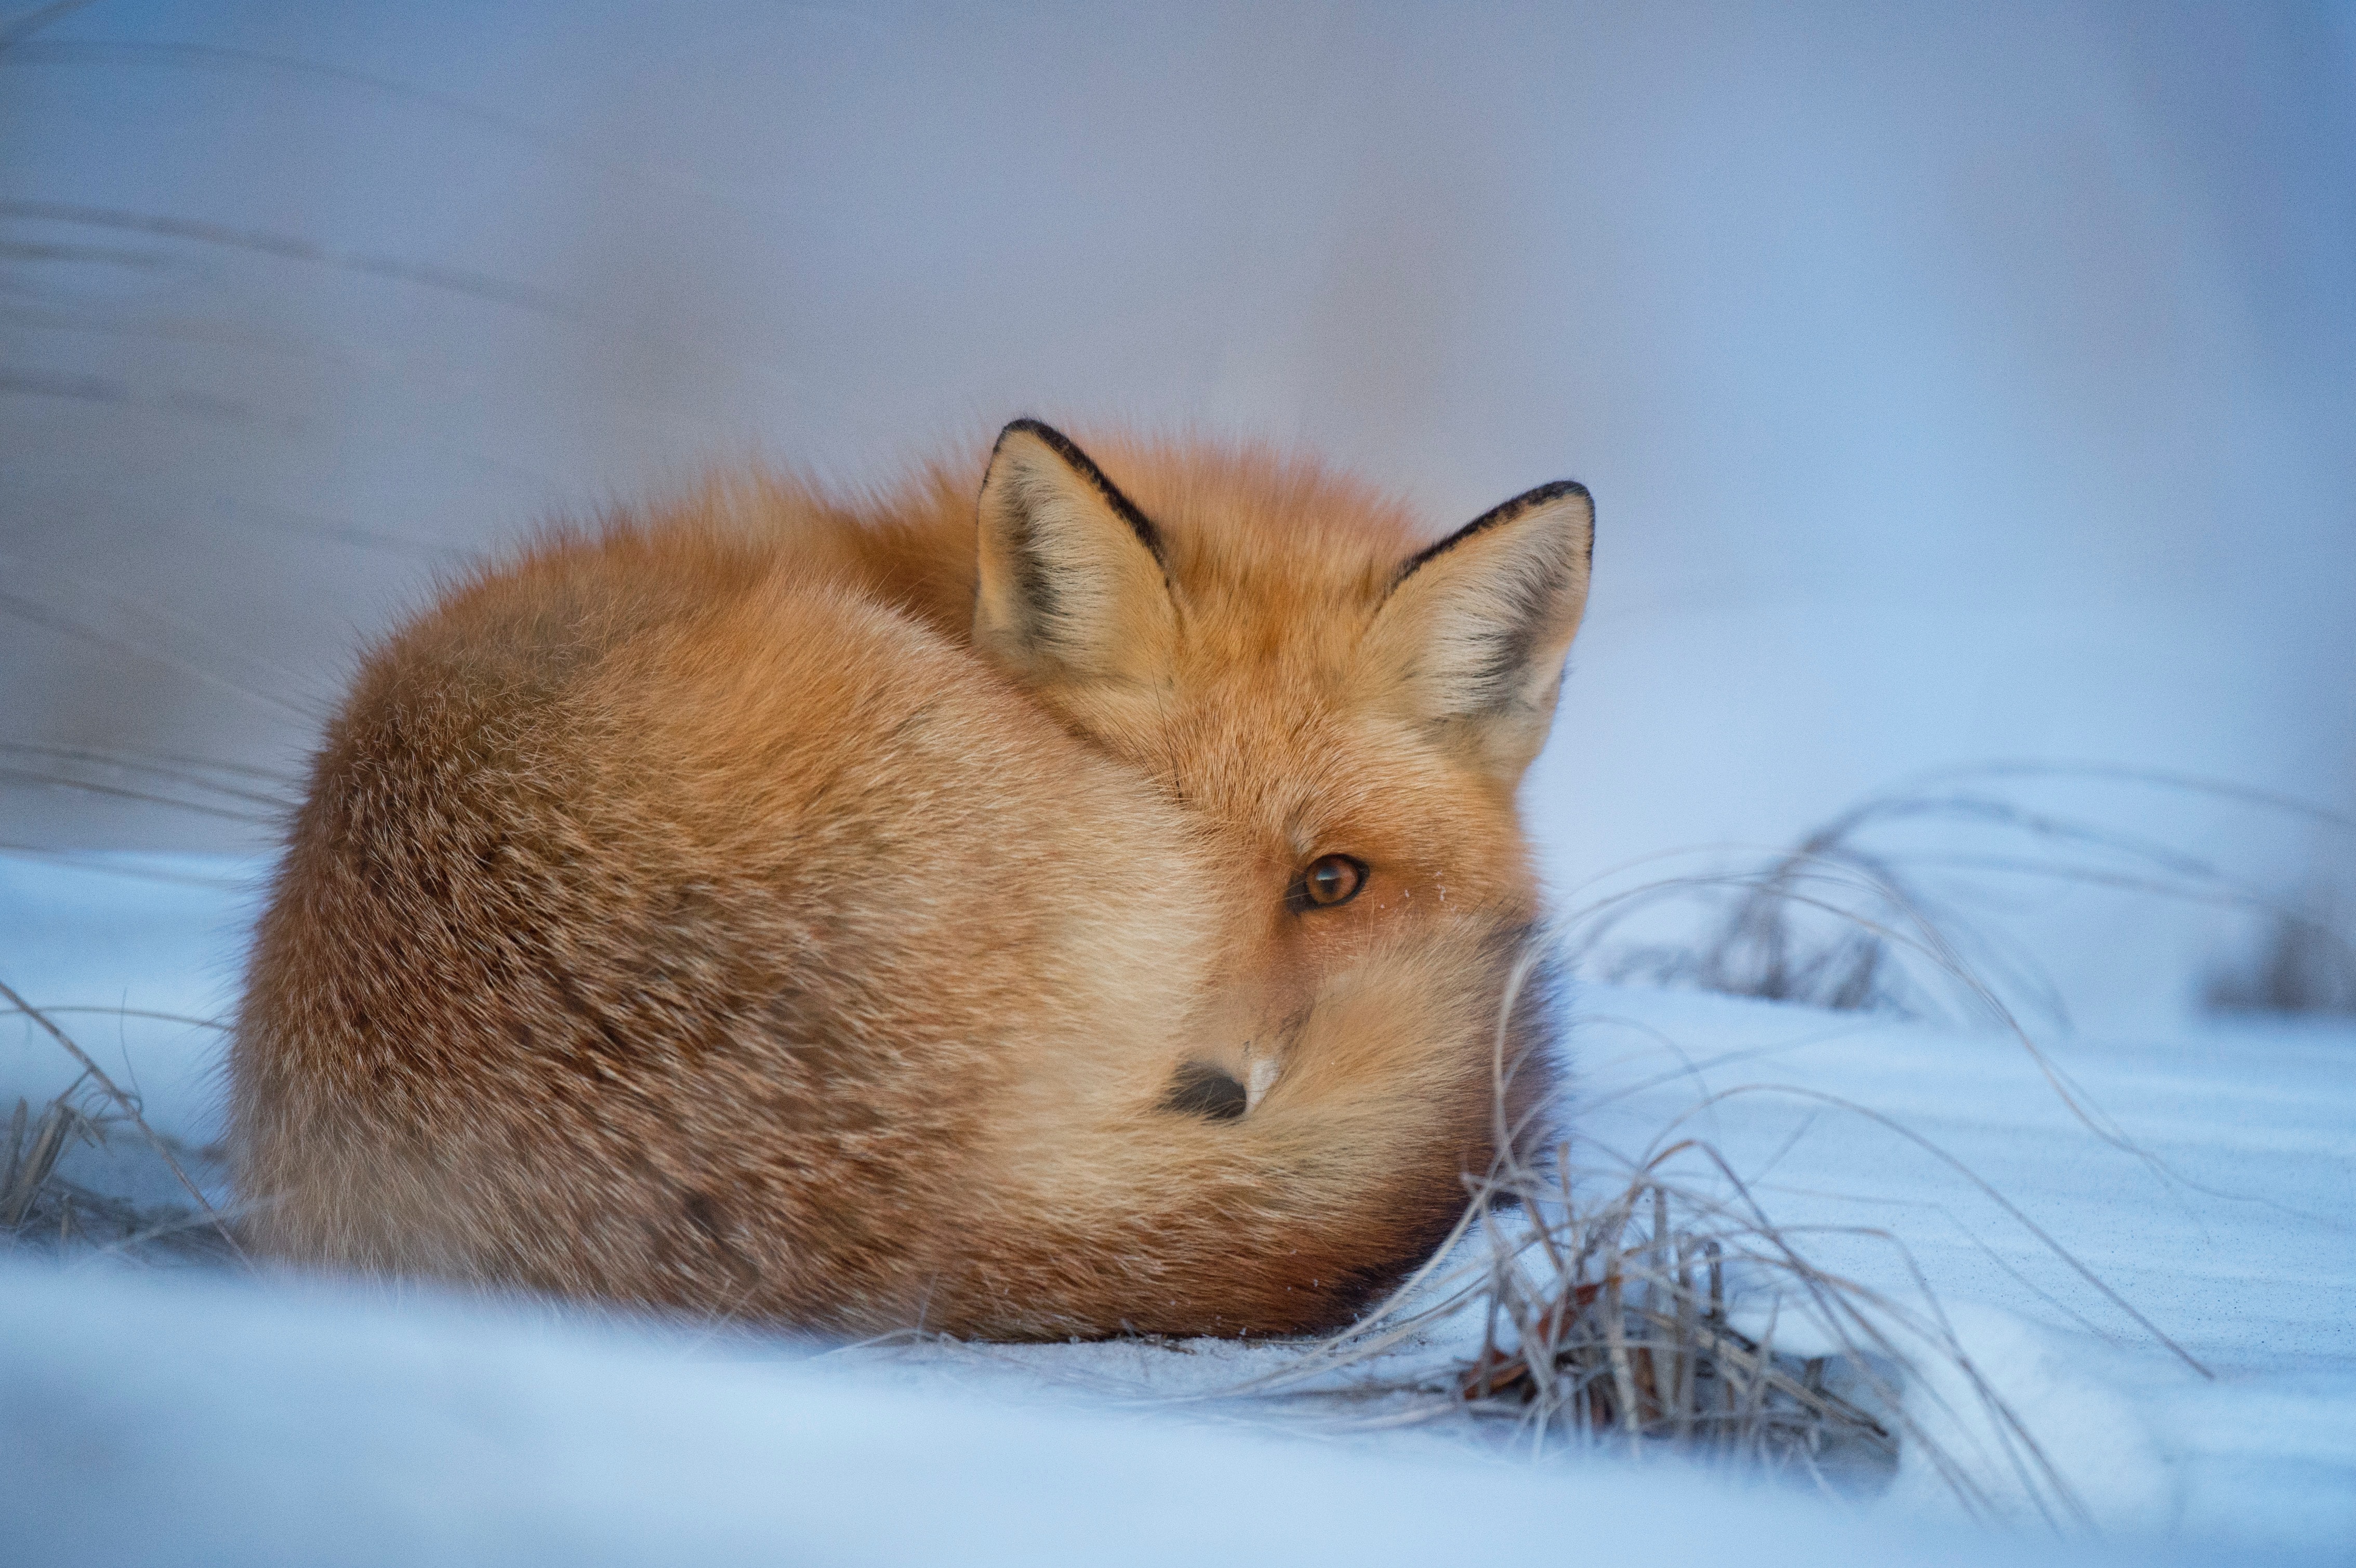 FOX IN THE SNOW